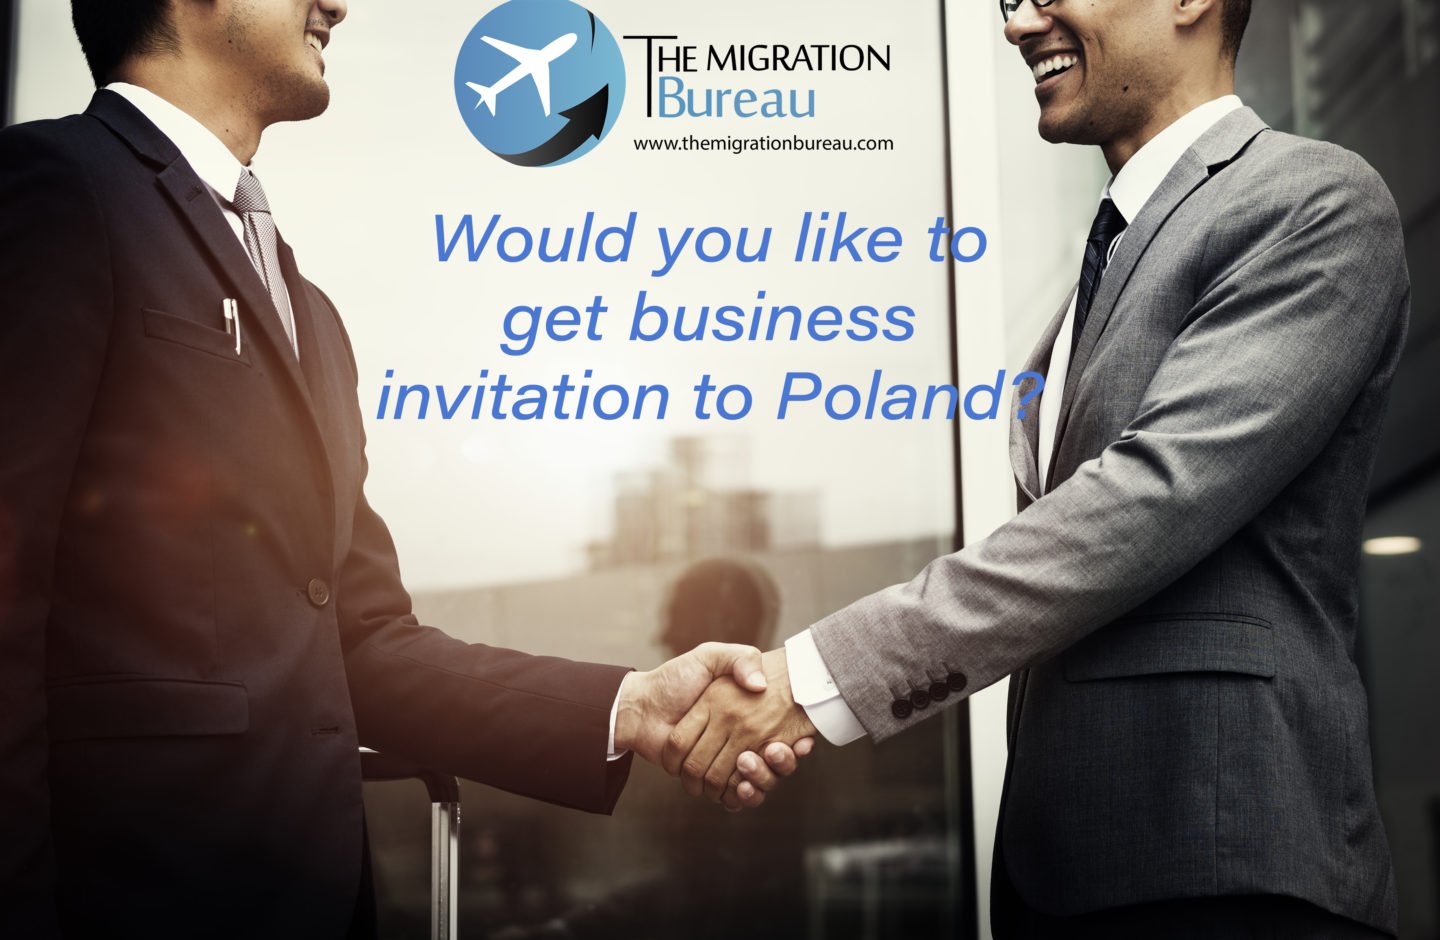 People from differend countries can start cooperation in Poland and get business invitation.